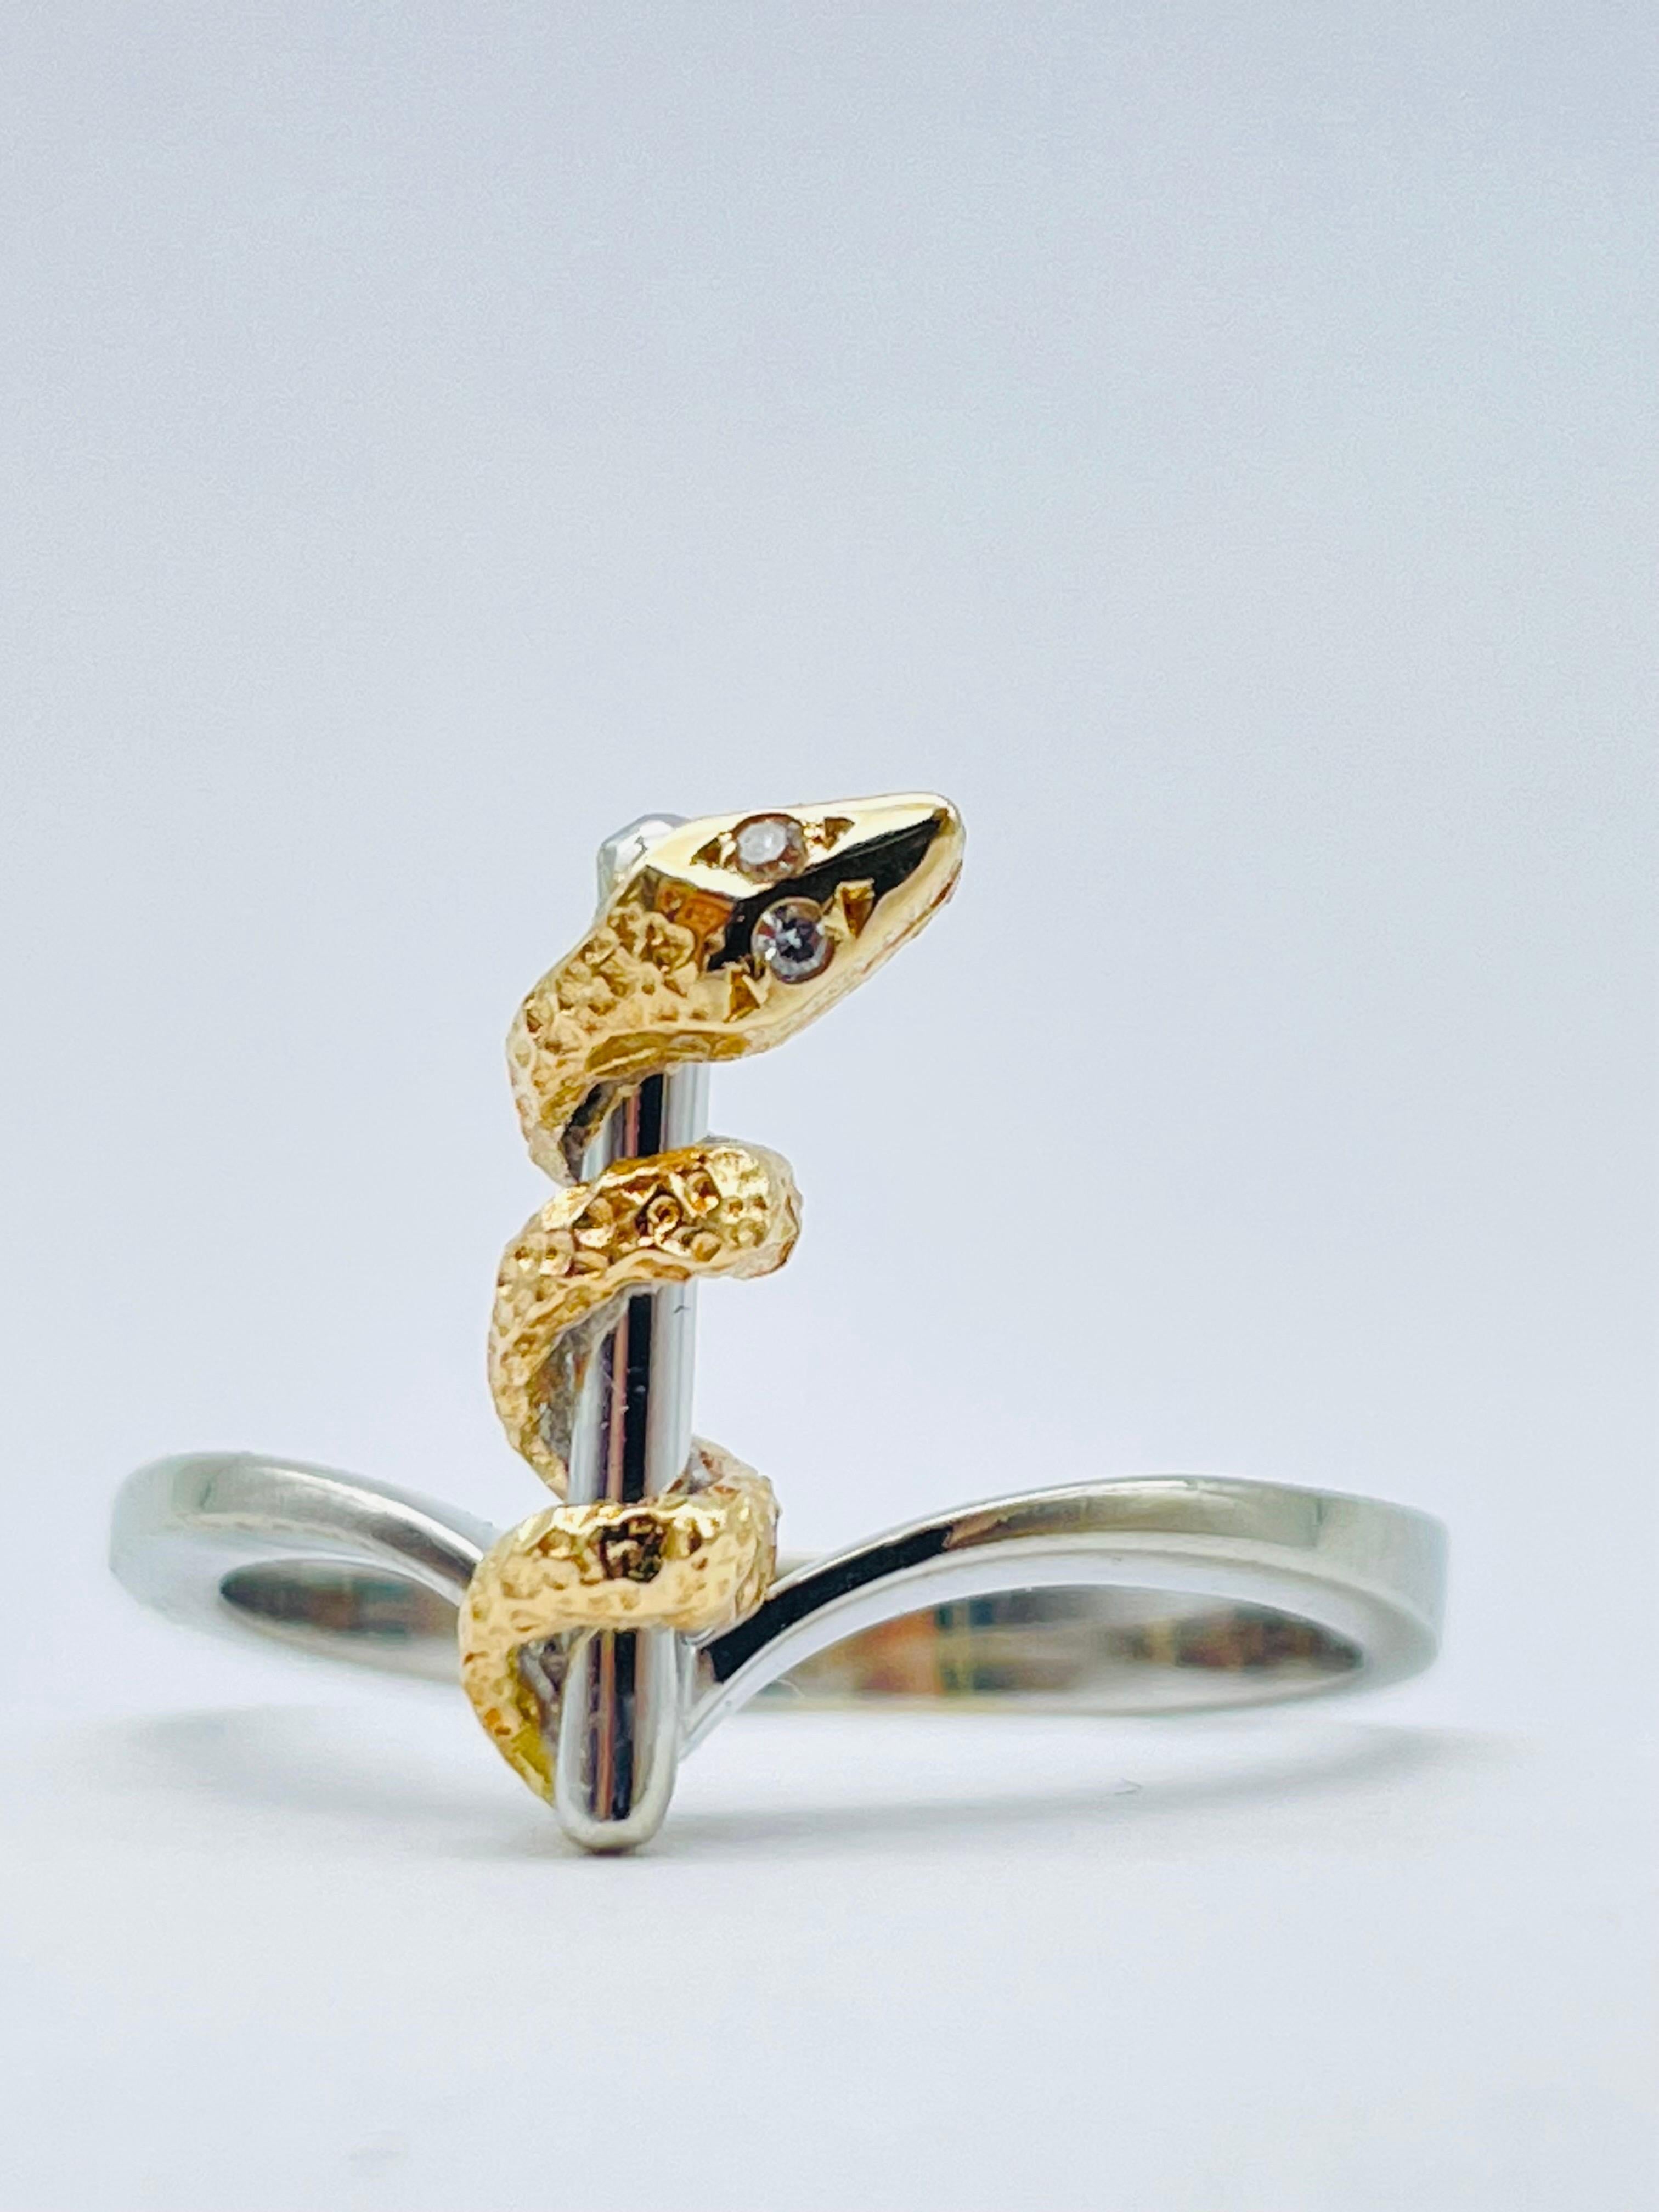 Unique and Elegant Snake Bicolor Ring with Diamond Eyes White/Yellow Gold 14k In Good Condition For Sale In Berlin, BE